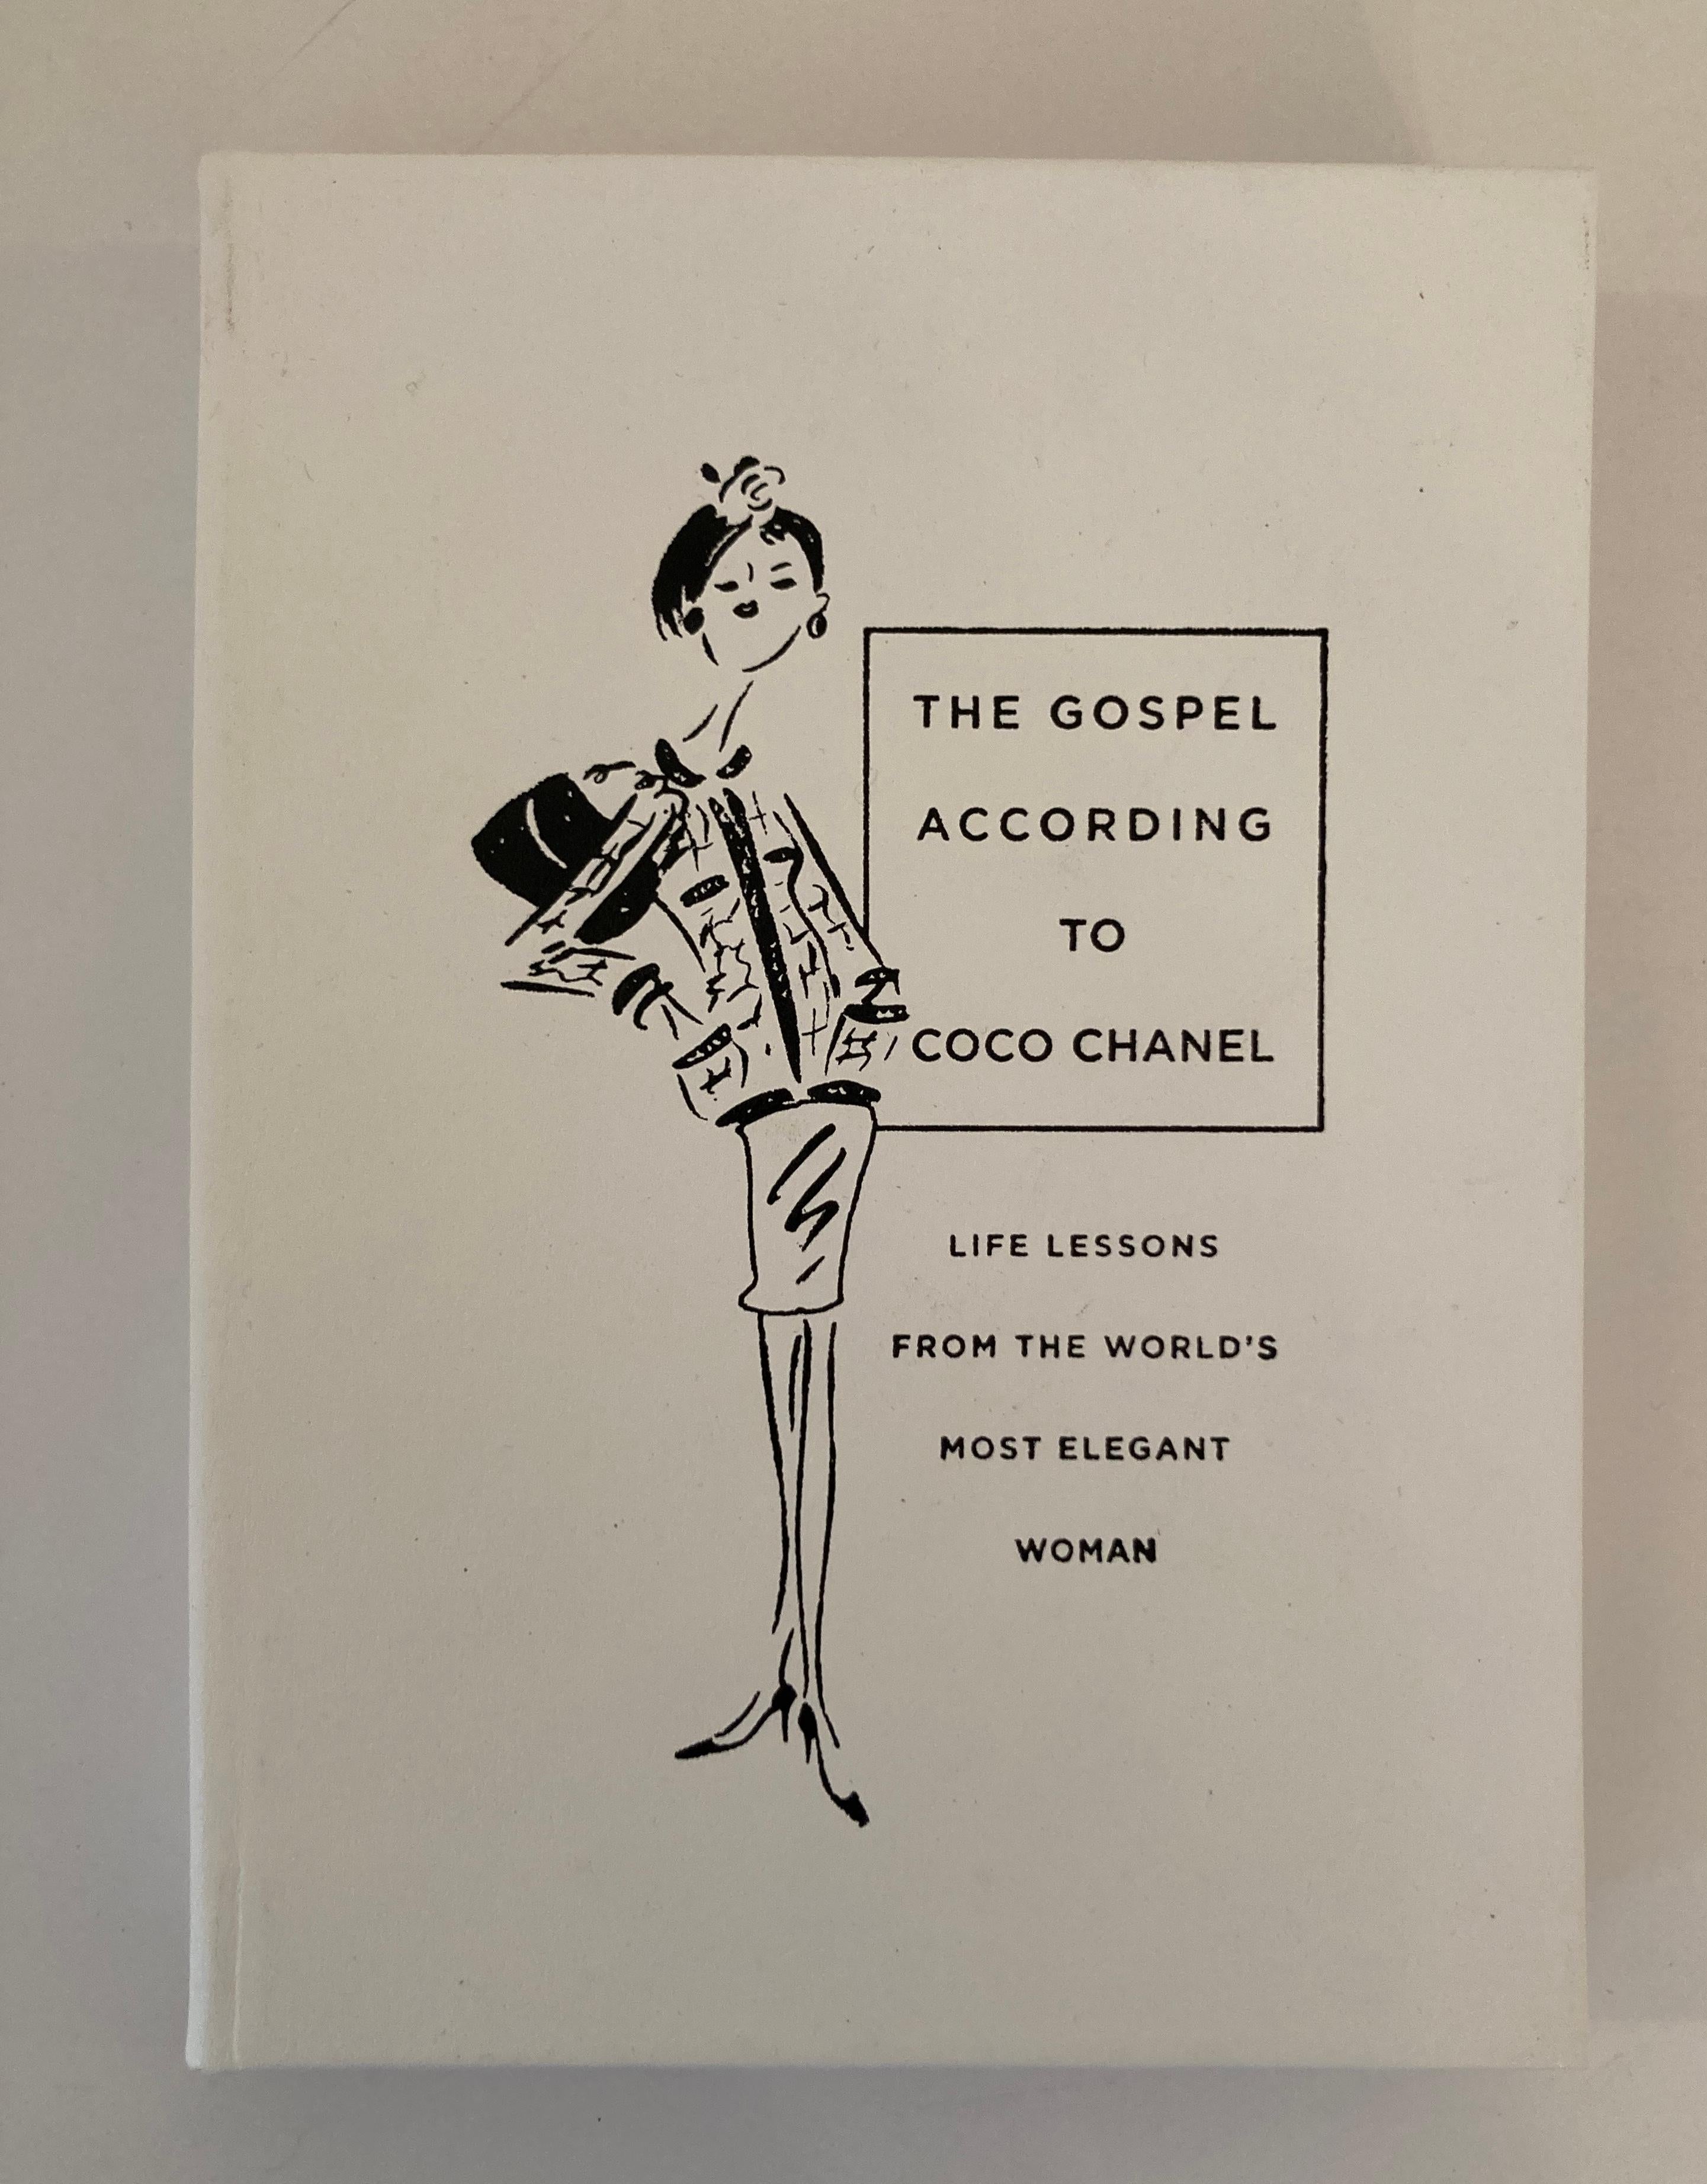 The Gospel According to Coco Chanel -  Book.
Written by Karen Karbo, this leather-bound book breaks down the key philosophies of the renowned Coco Chanel, life lessons from the world's most elegant woman, with topics touching on everything from